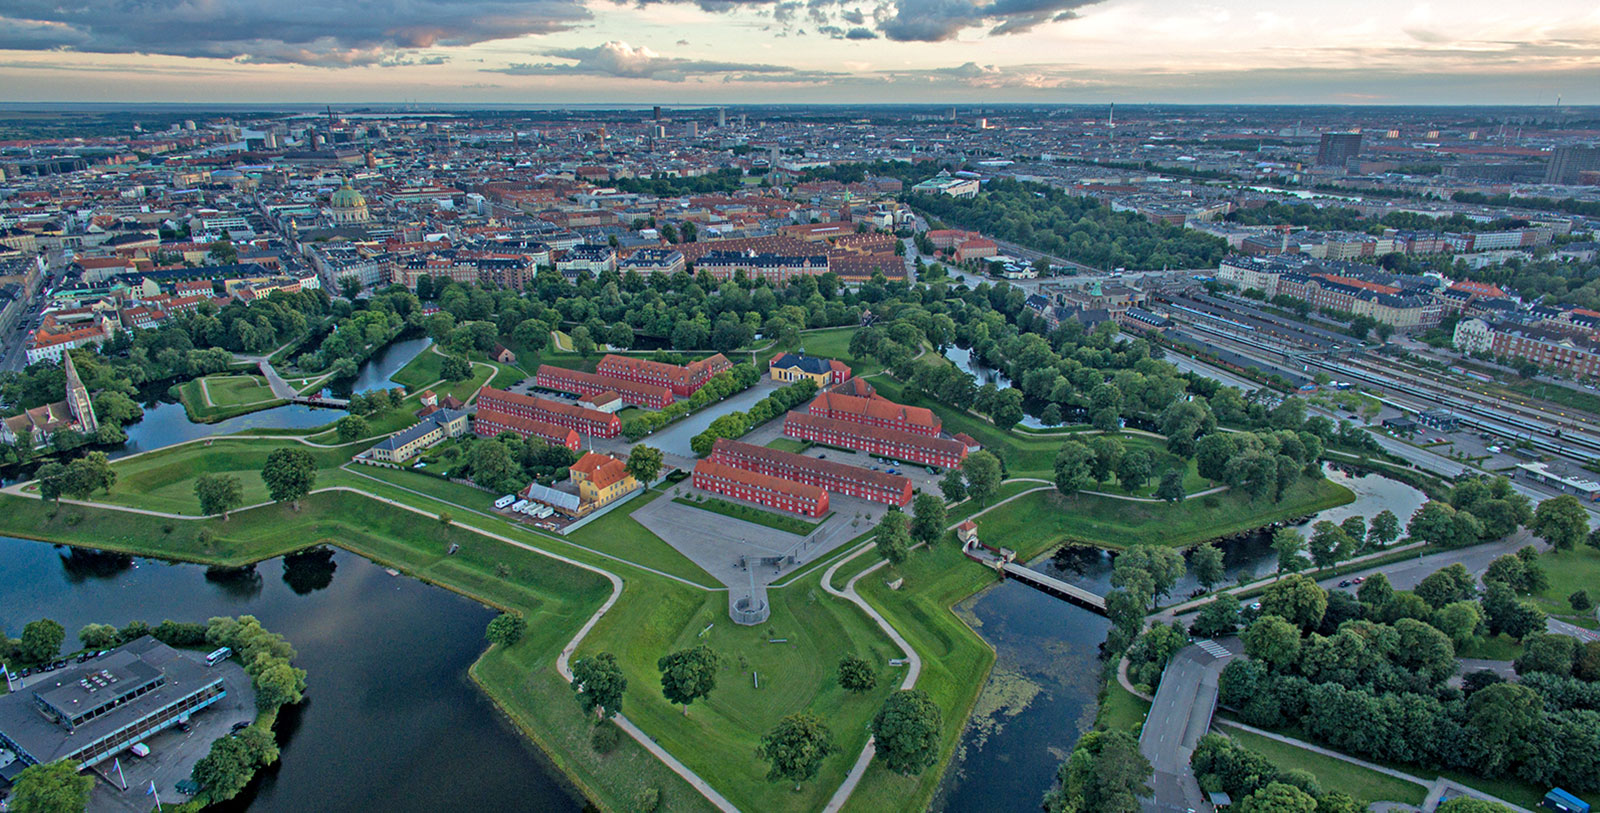 Experience a tour of the imposing Kastellet.